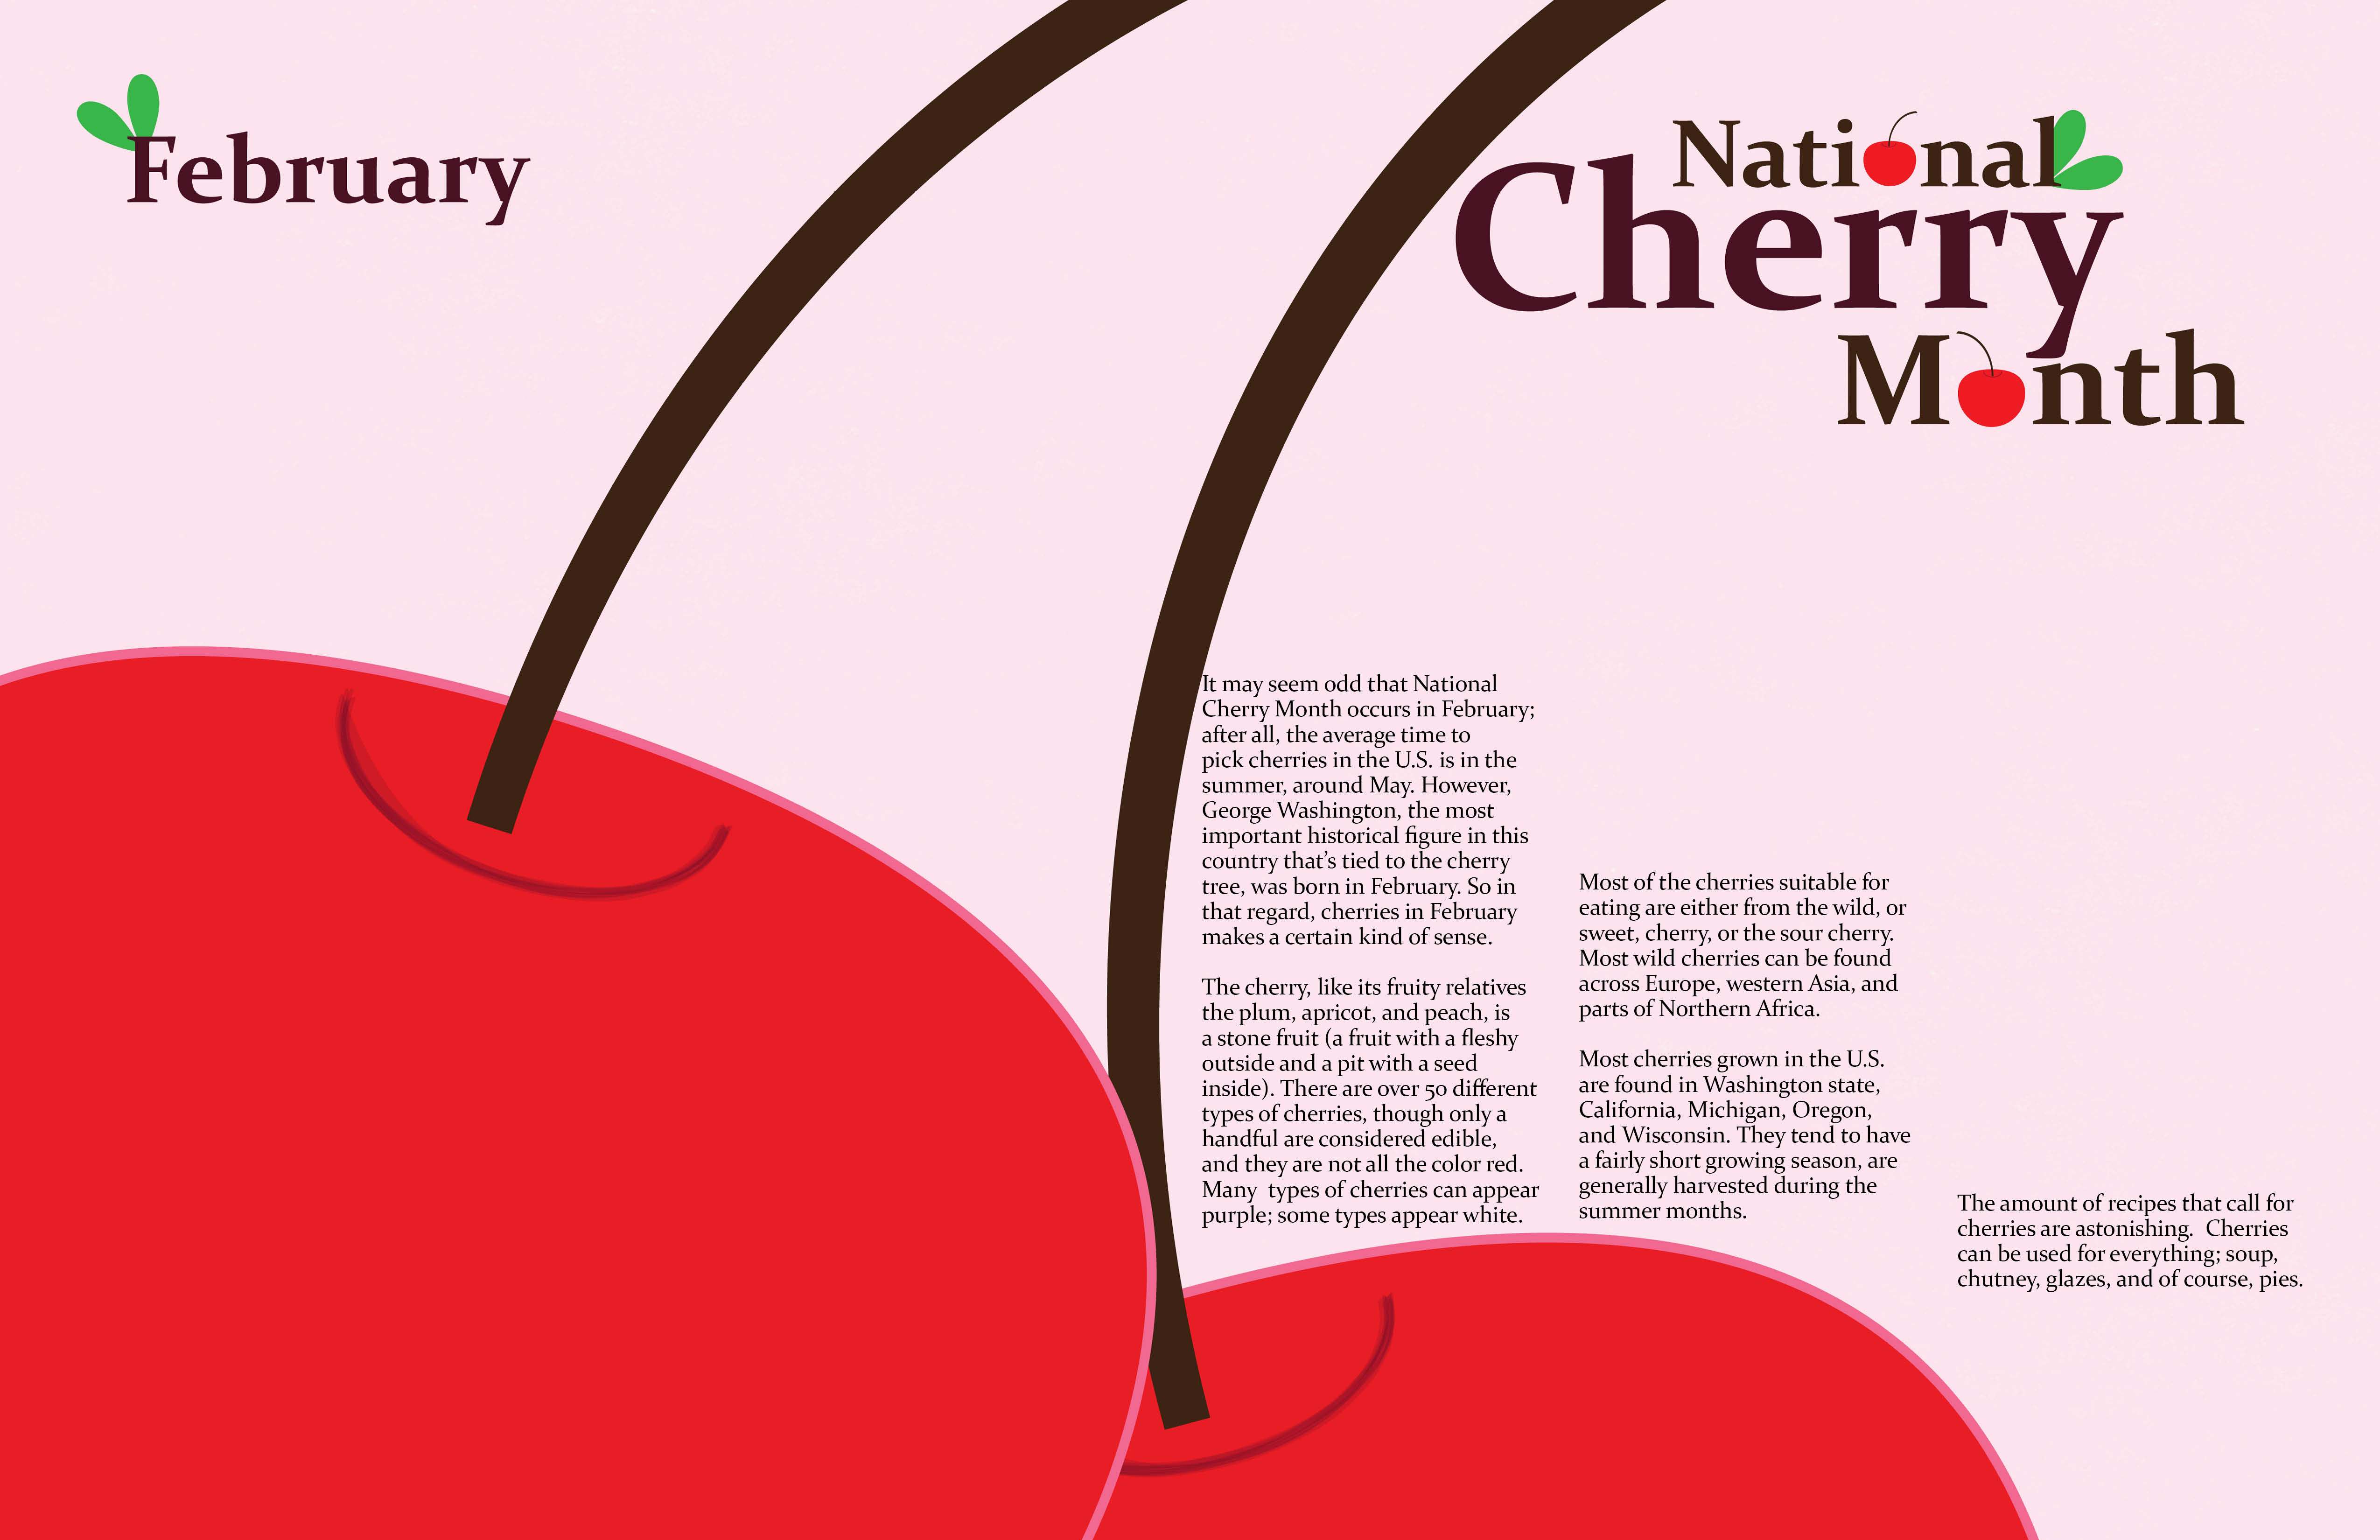 National Cherry Month Backgrounds, Compatible - PC, Mobile, Gadgets| 5100x3300 px